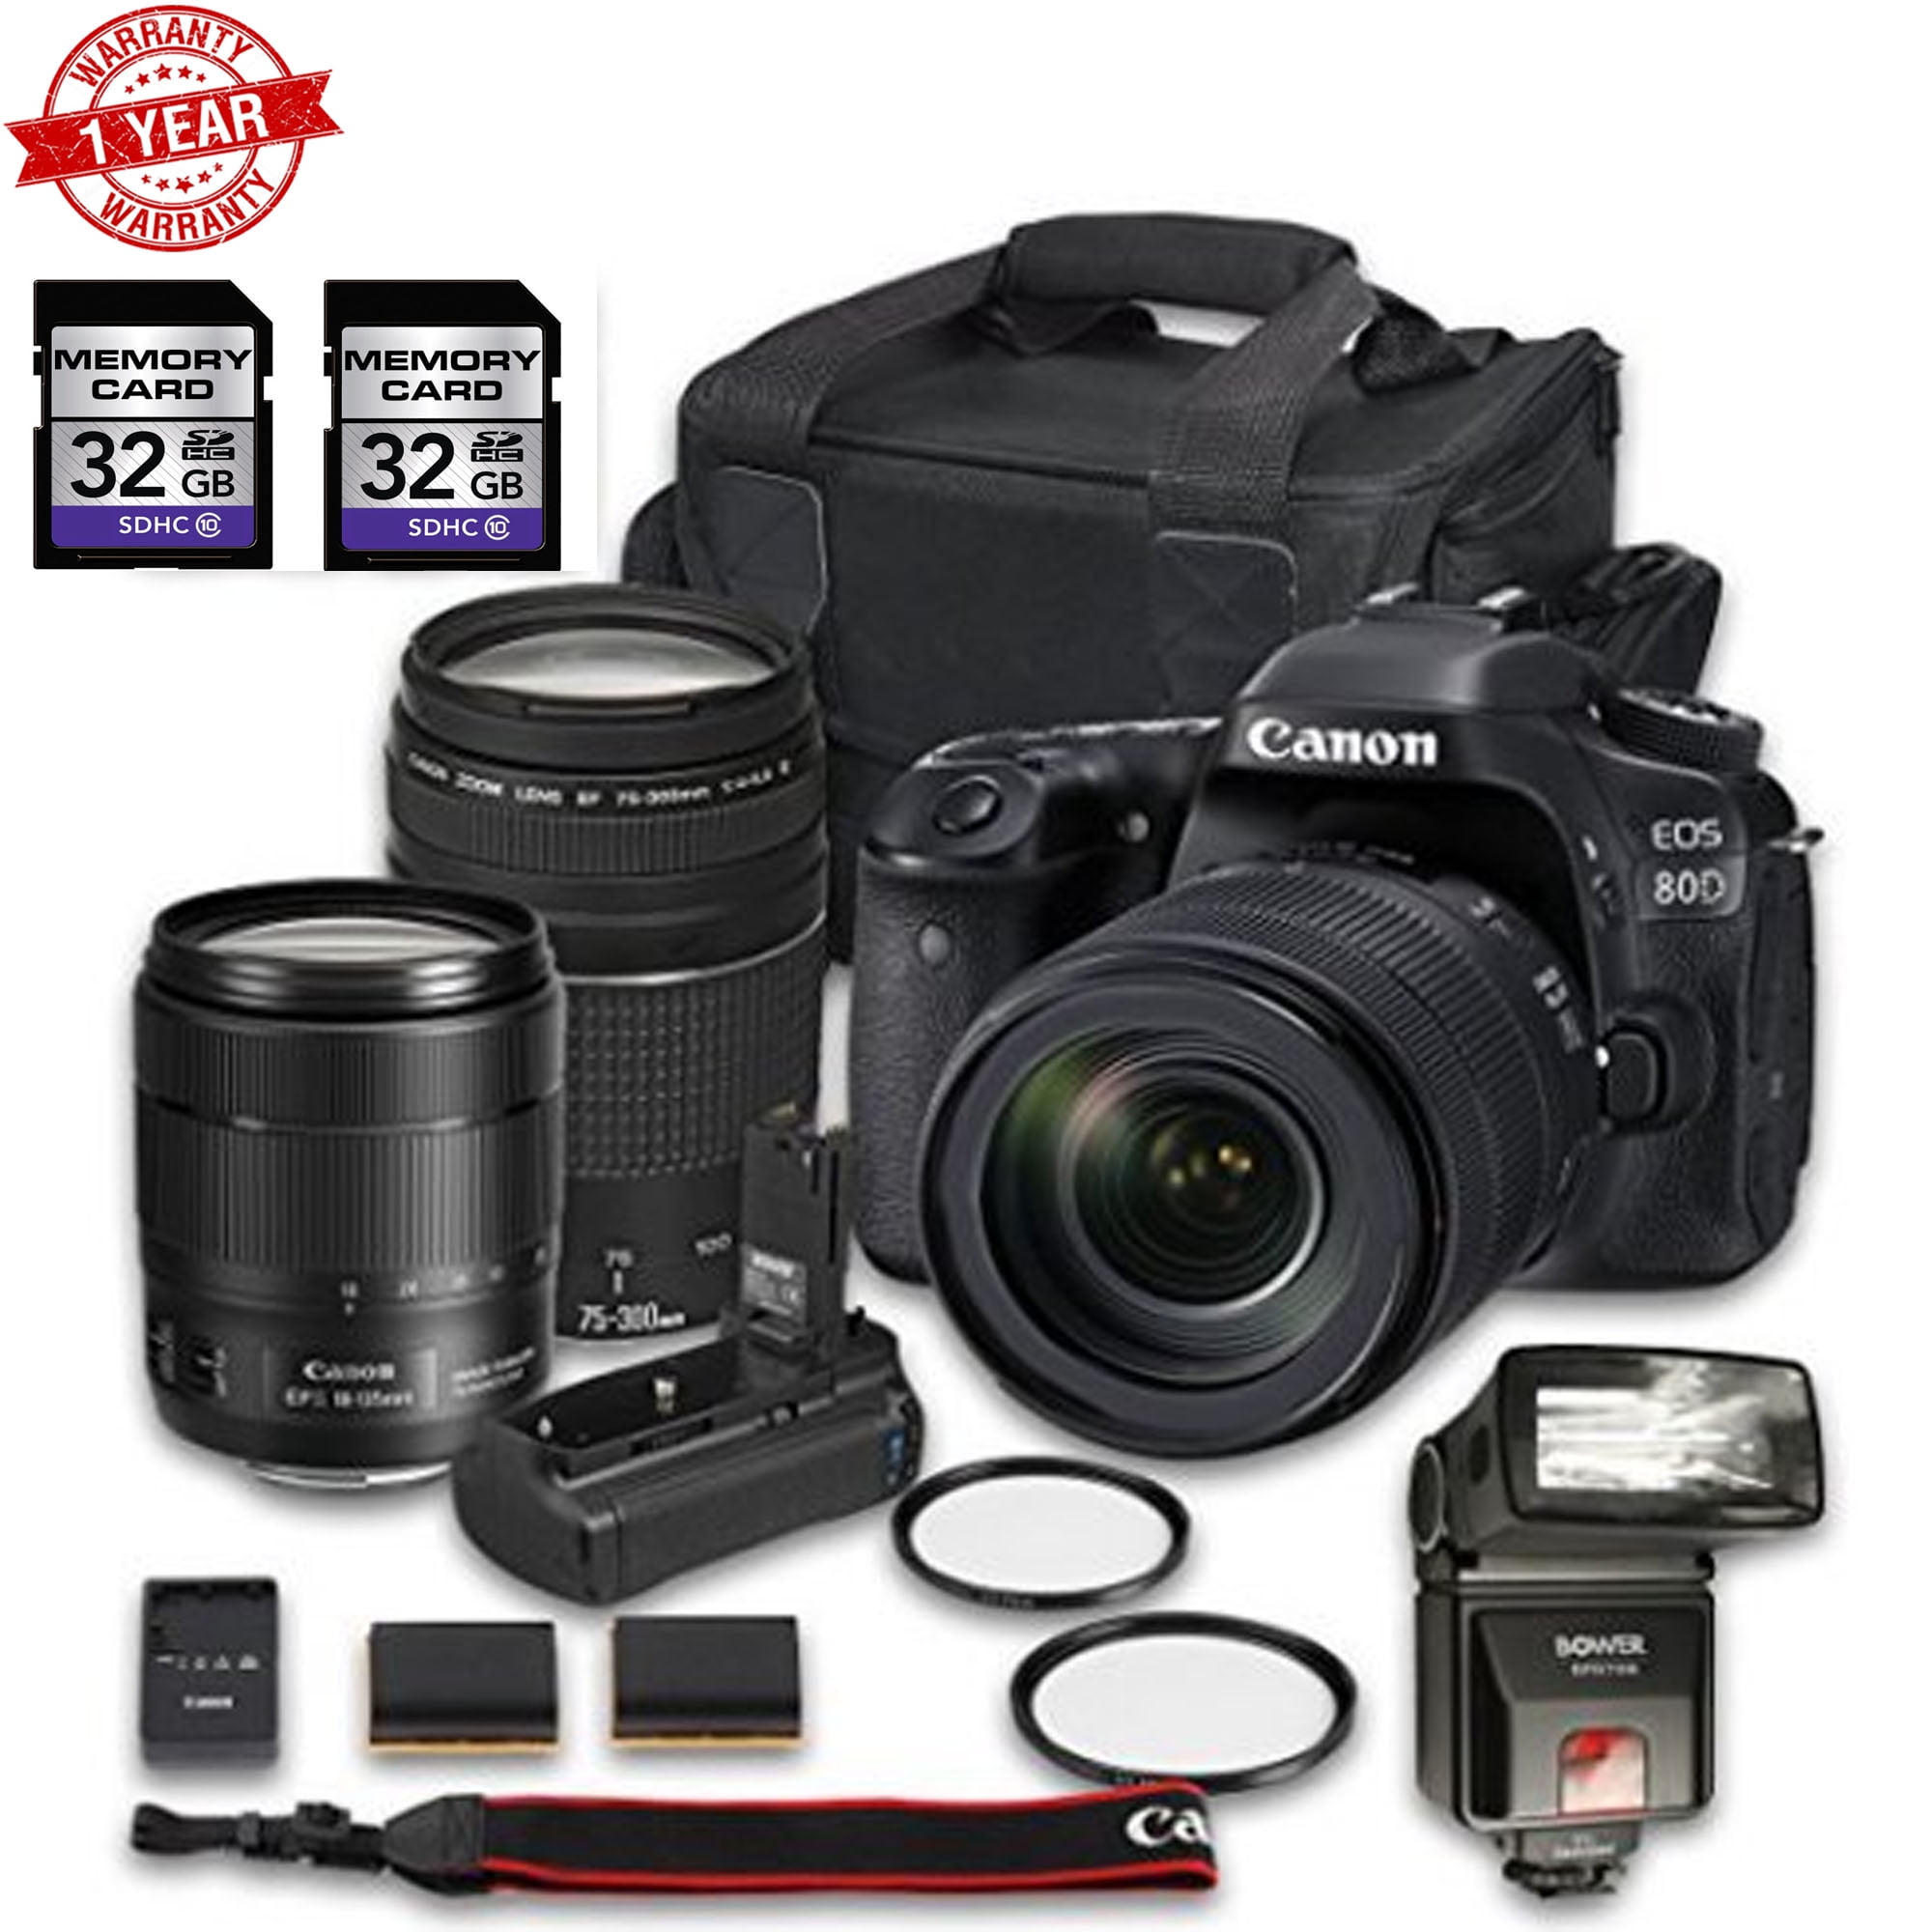 Canon Eos 80d Dslr Camera Bundle With Canon Ef S 18 135mm F 3 5 5 6 Is